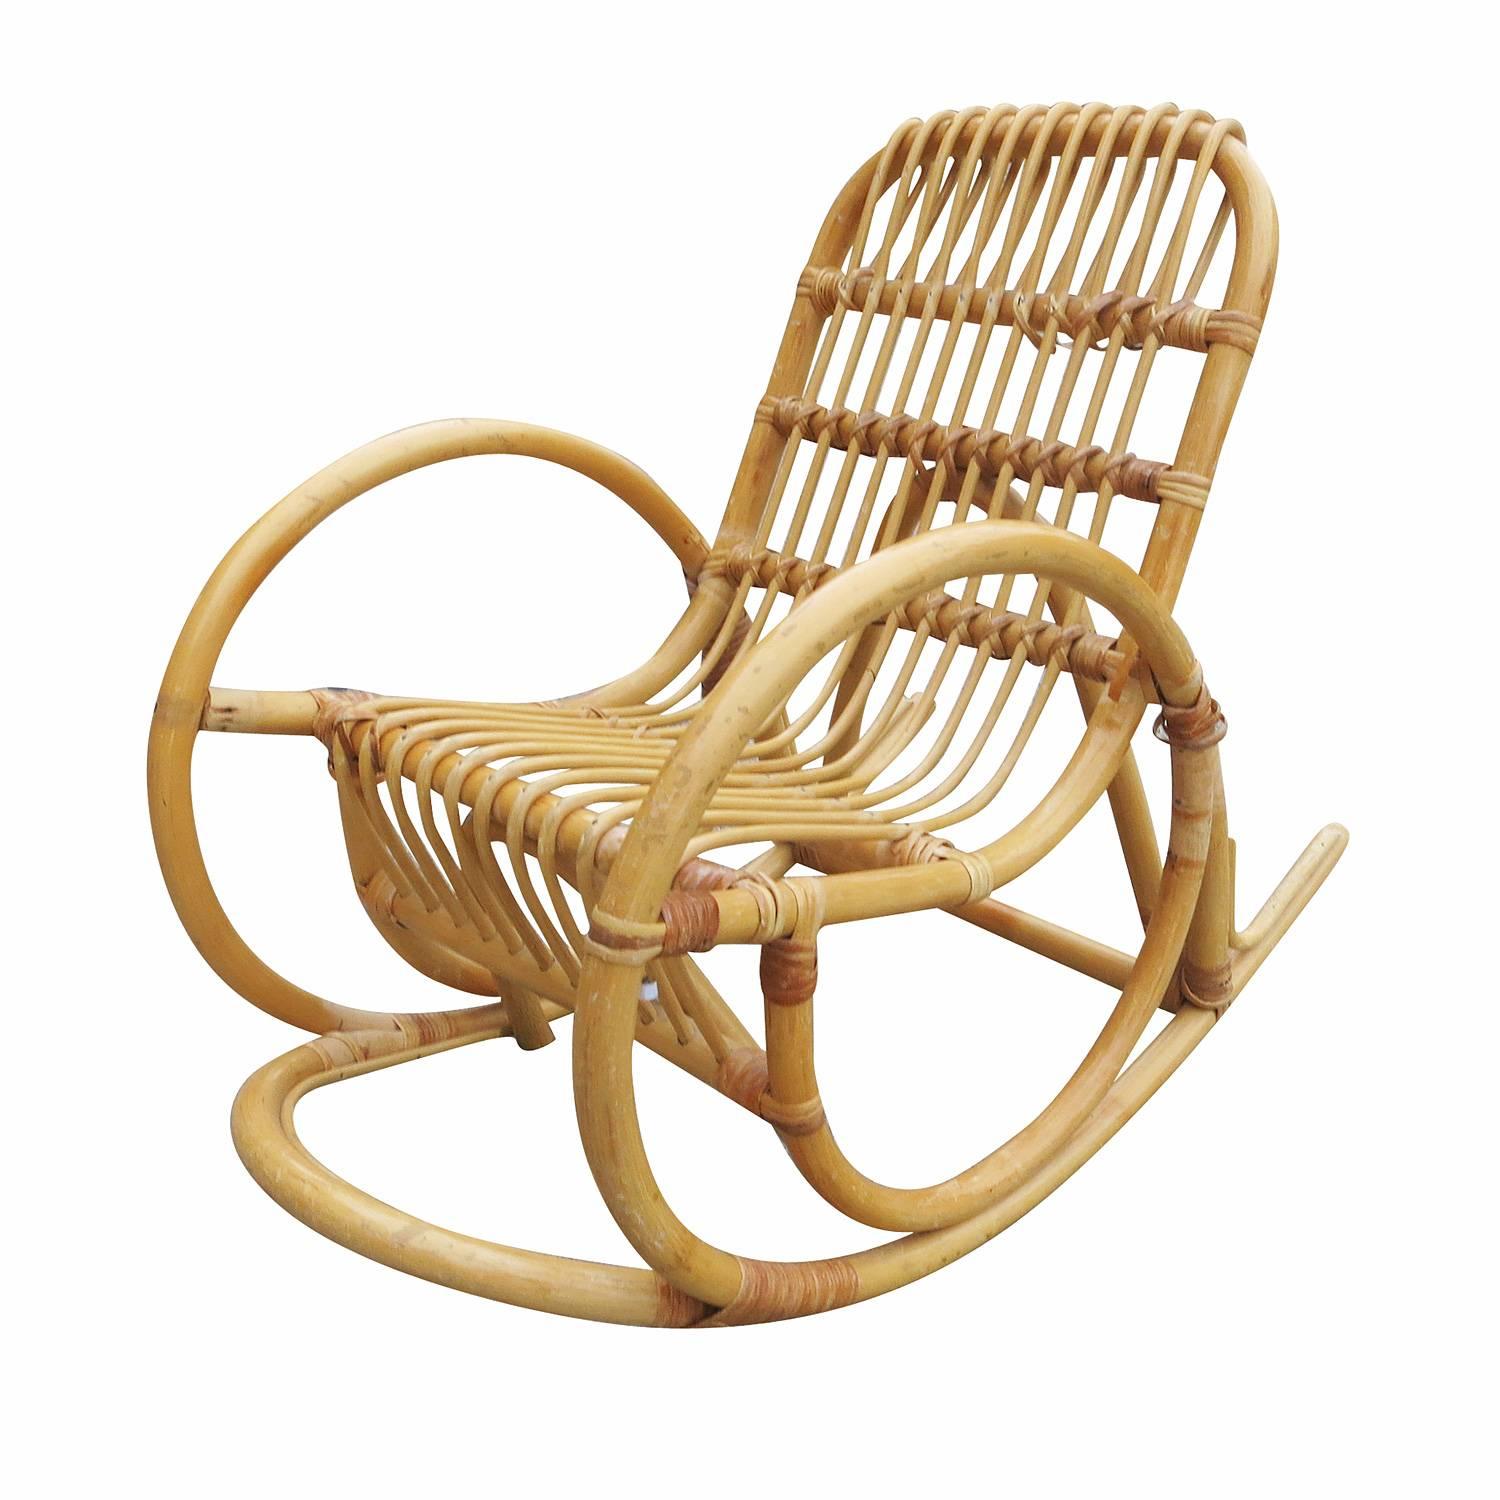 A rare Paul Frankl inspired one-strand snake arm childrens size rattan rocking chair with stick rattan seat. 

Professionally restored to original specifications.

All rattan, bamboo and wicker furniture has been painstakingly refurbished to the